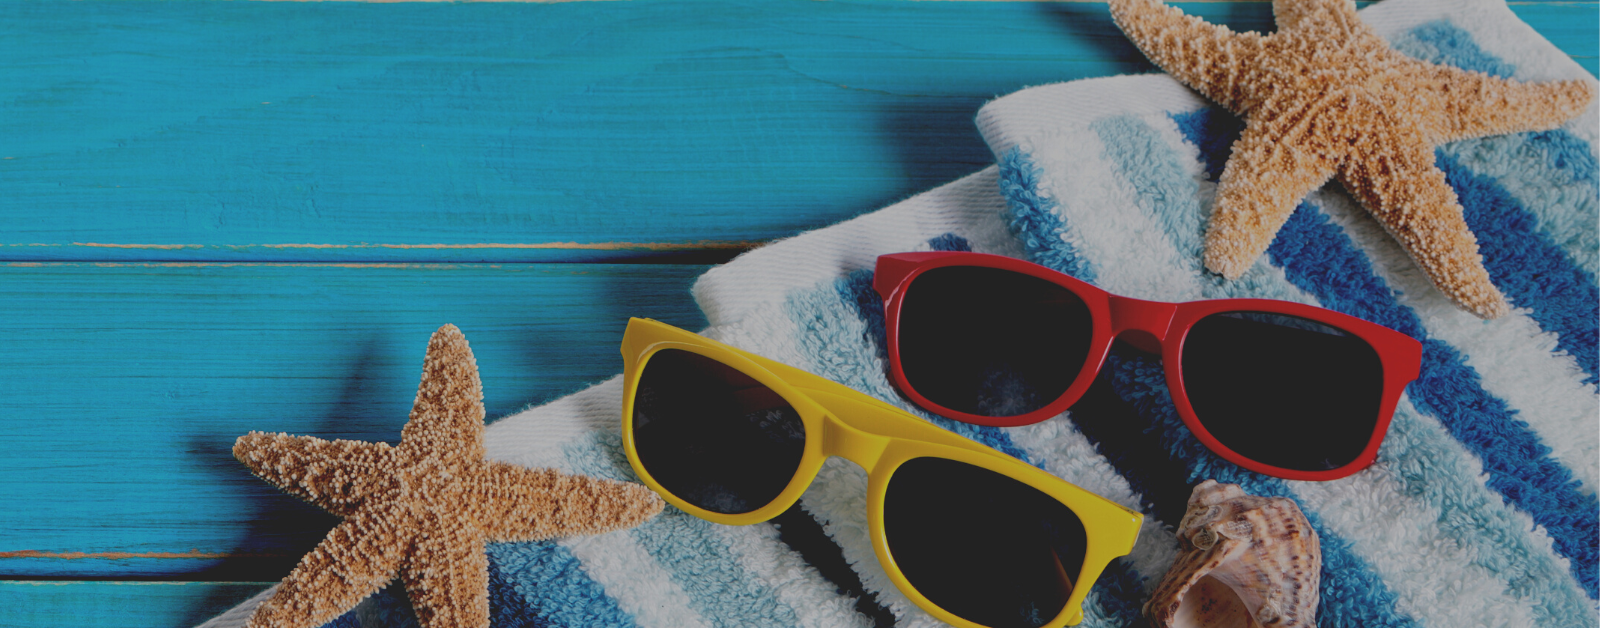 photo background of sunglasses and towel on blue planks